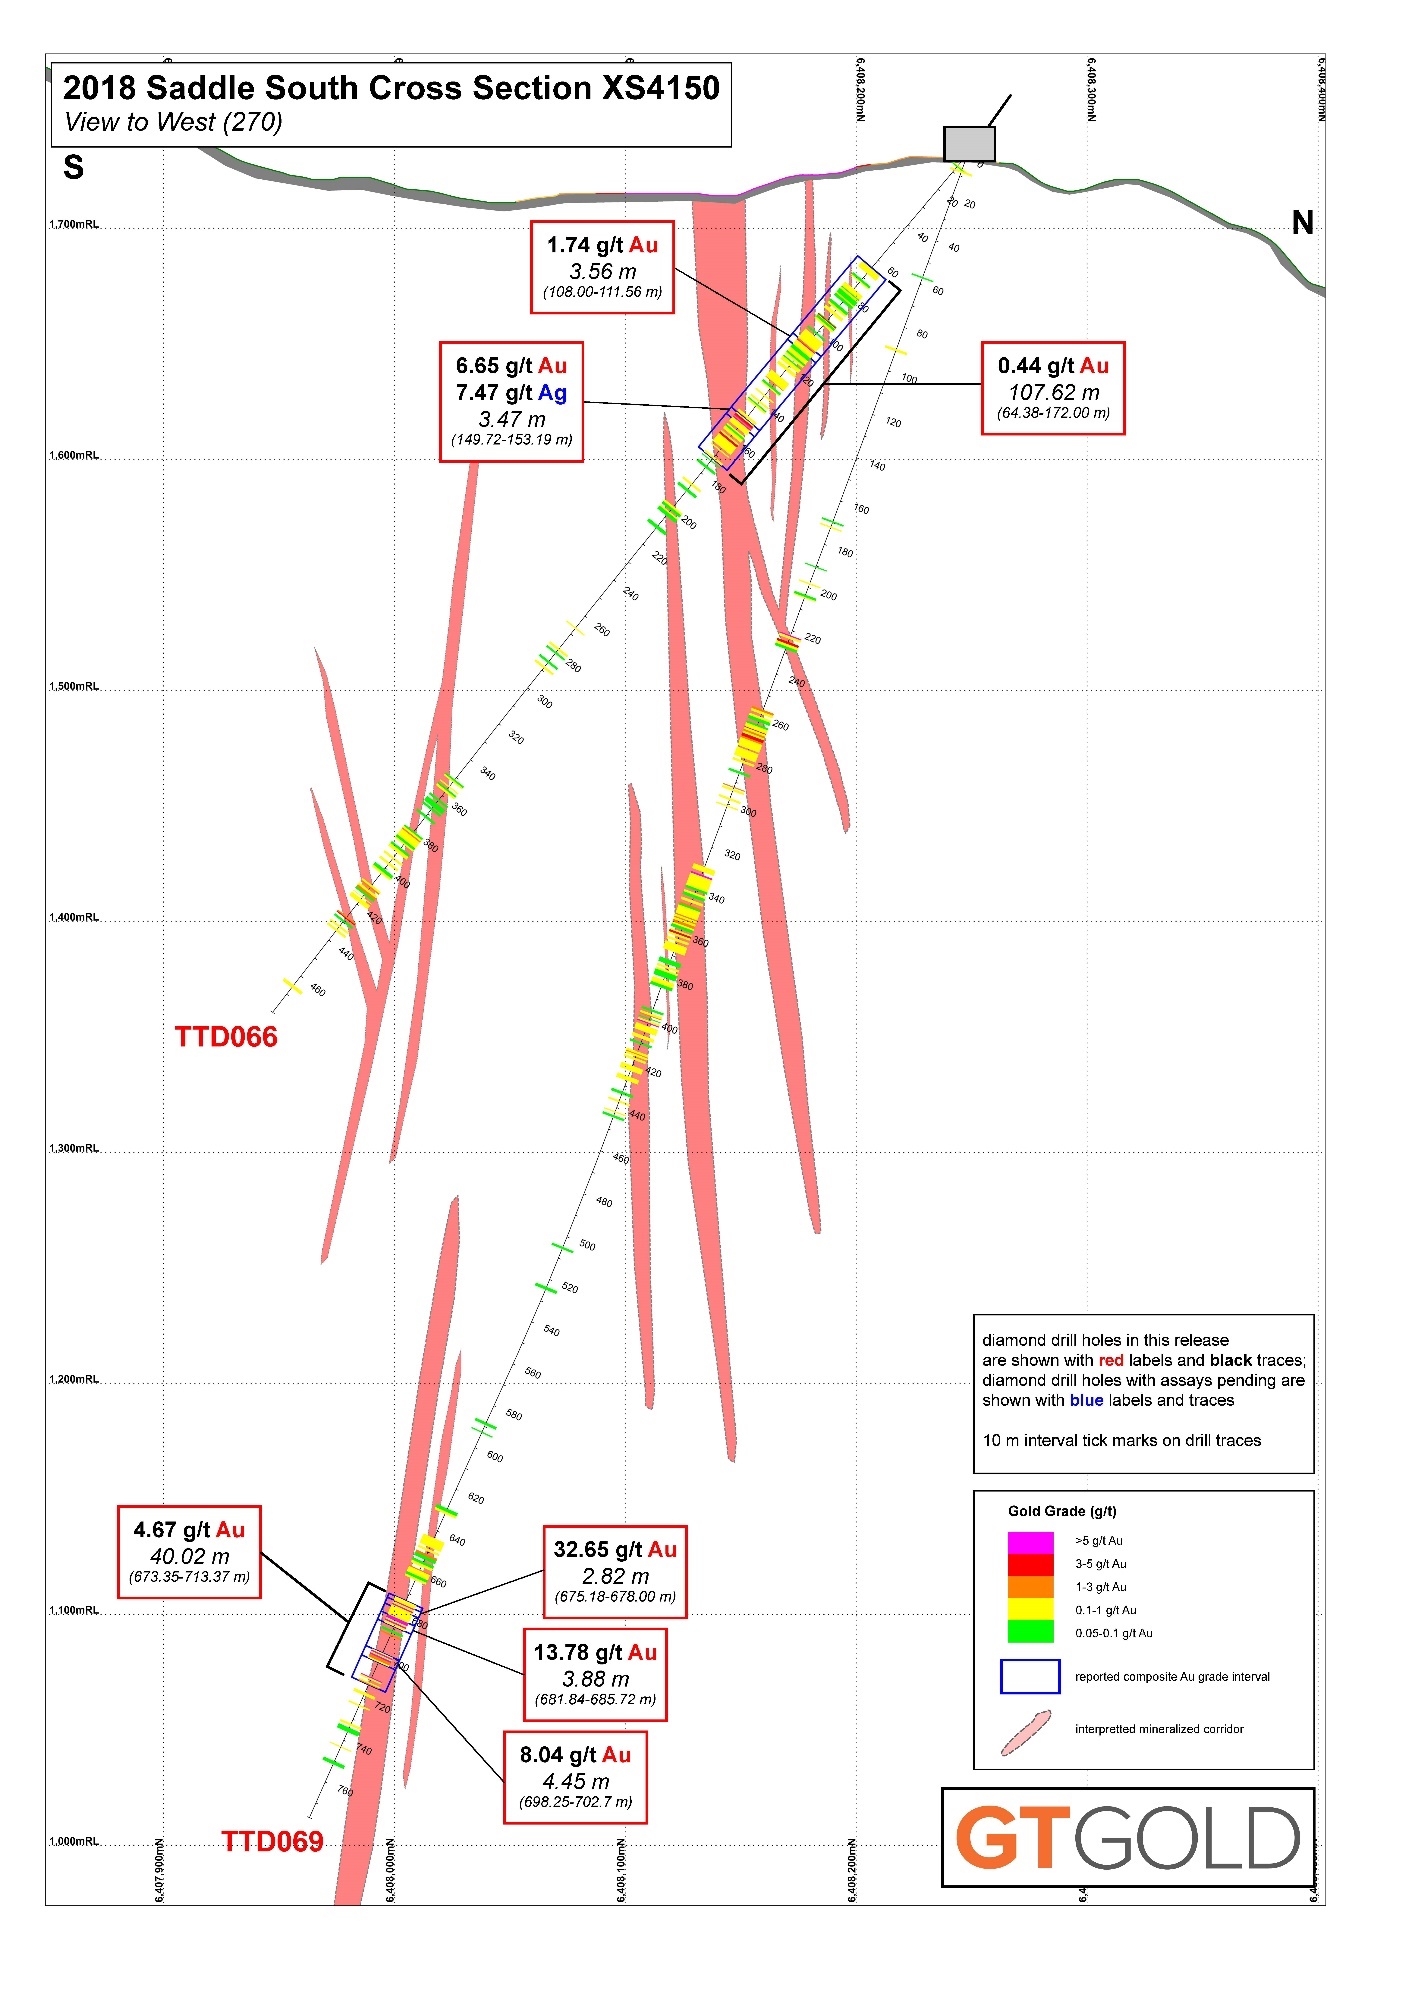 Saddle South Drilling Cross-Section 4150, August 8, 2018